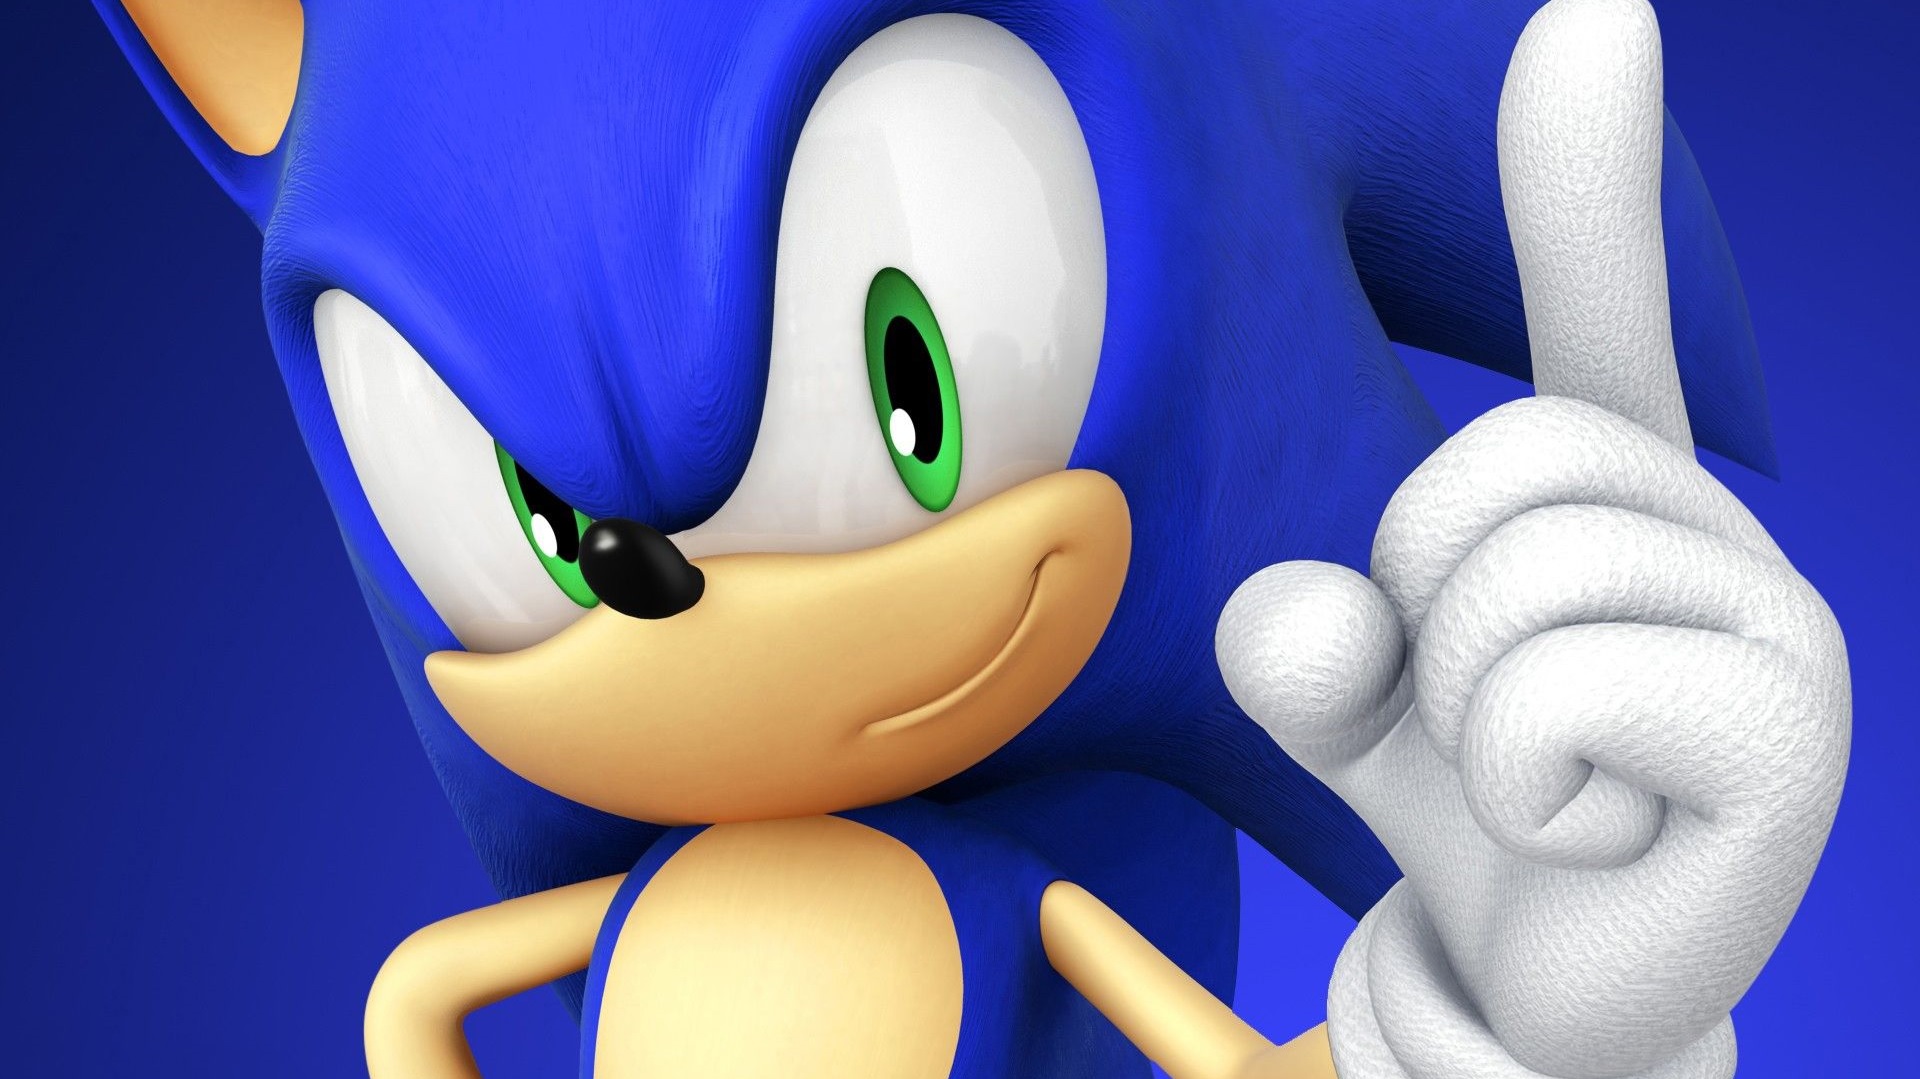 New Sonic game coming to PC in 2022, gets official teaser trailer